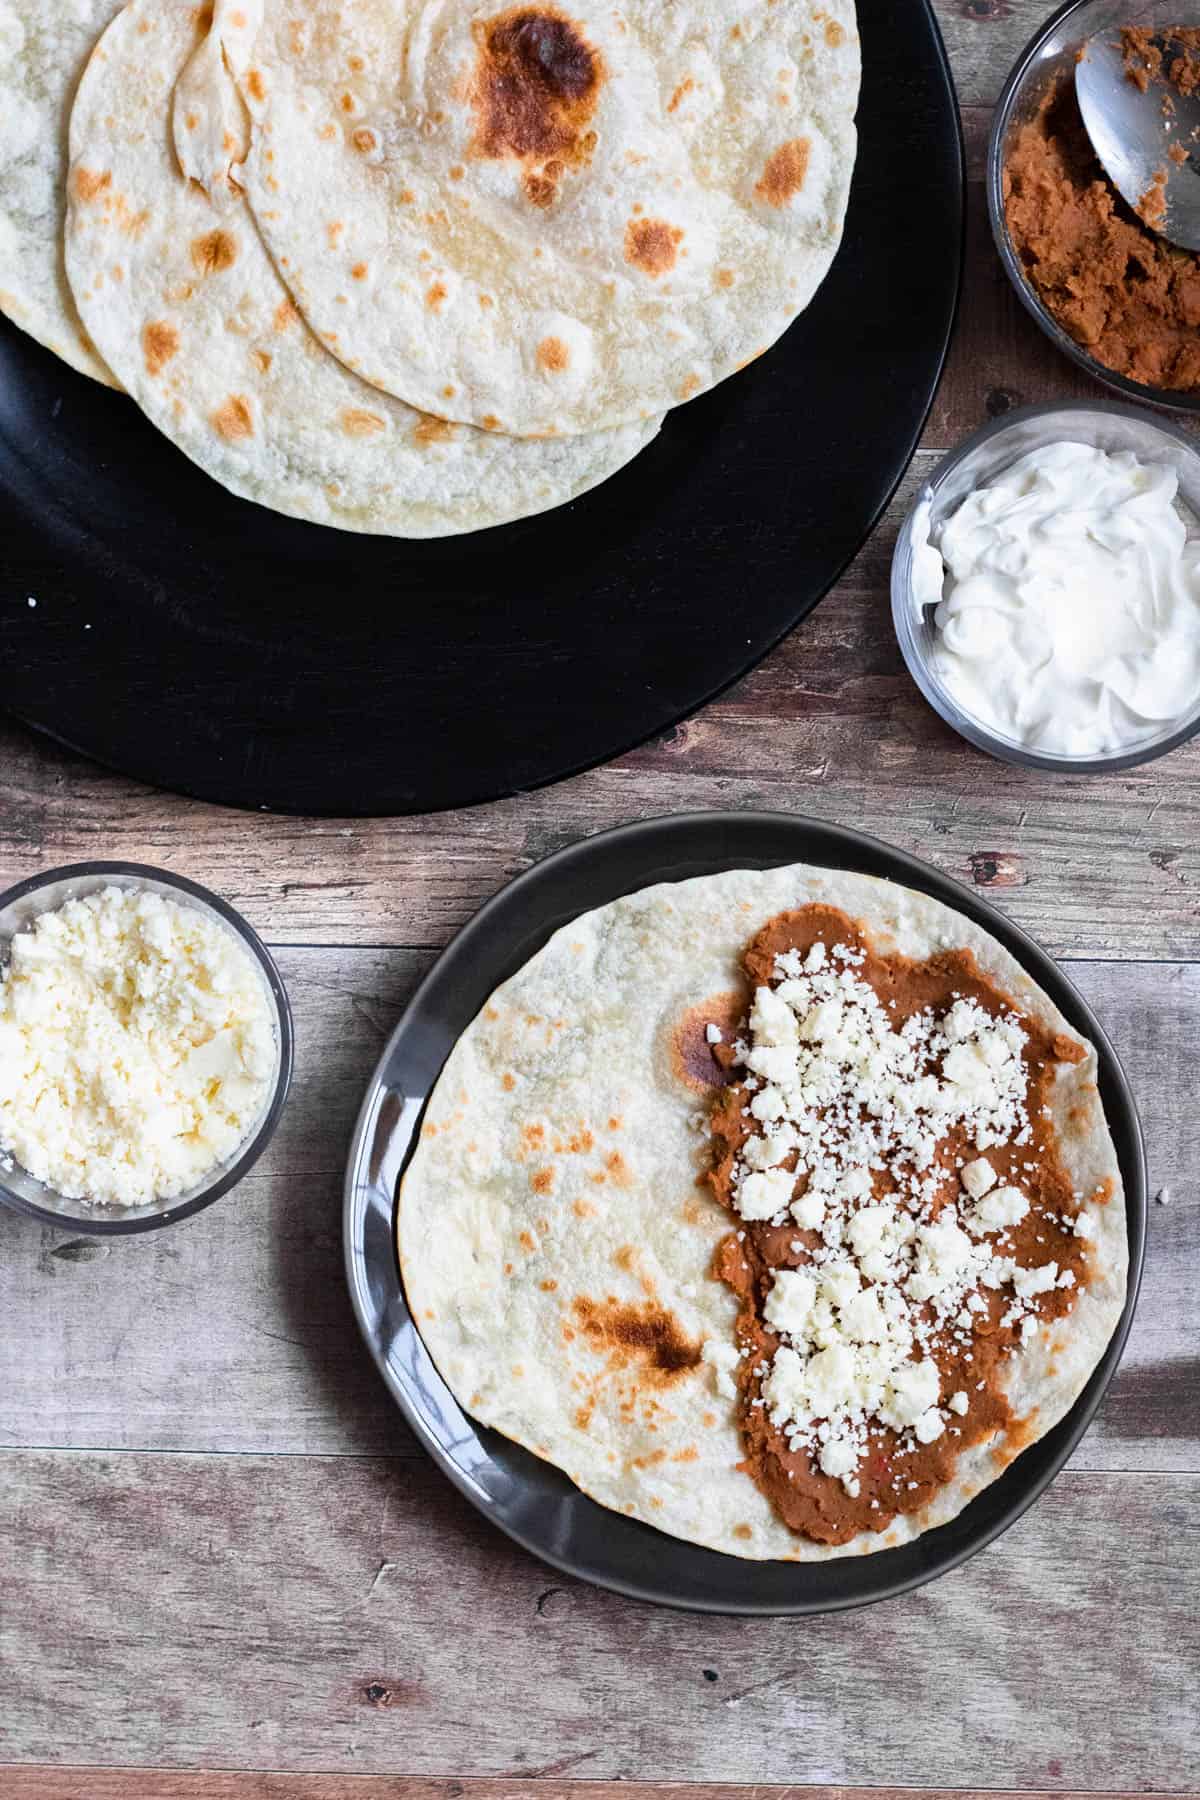 As you continue to prepare a Baleadas Hondurenas, sprinkle cotija cheese over the refried beans on the tortilla. 